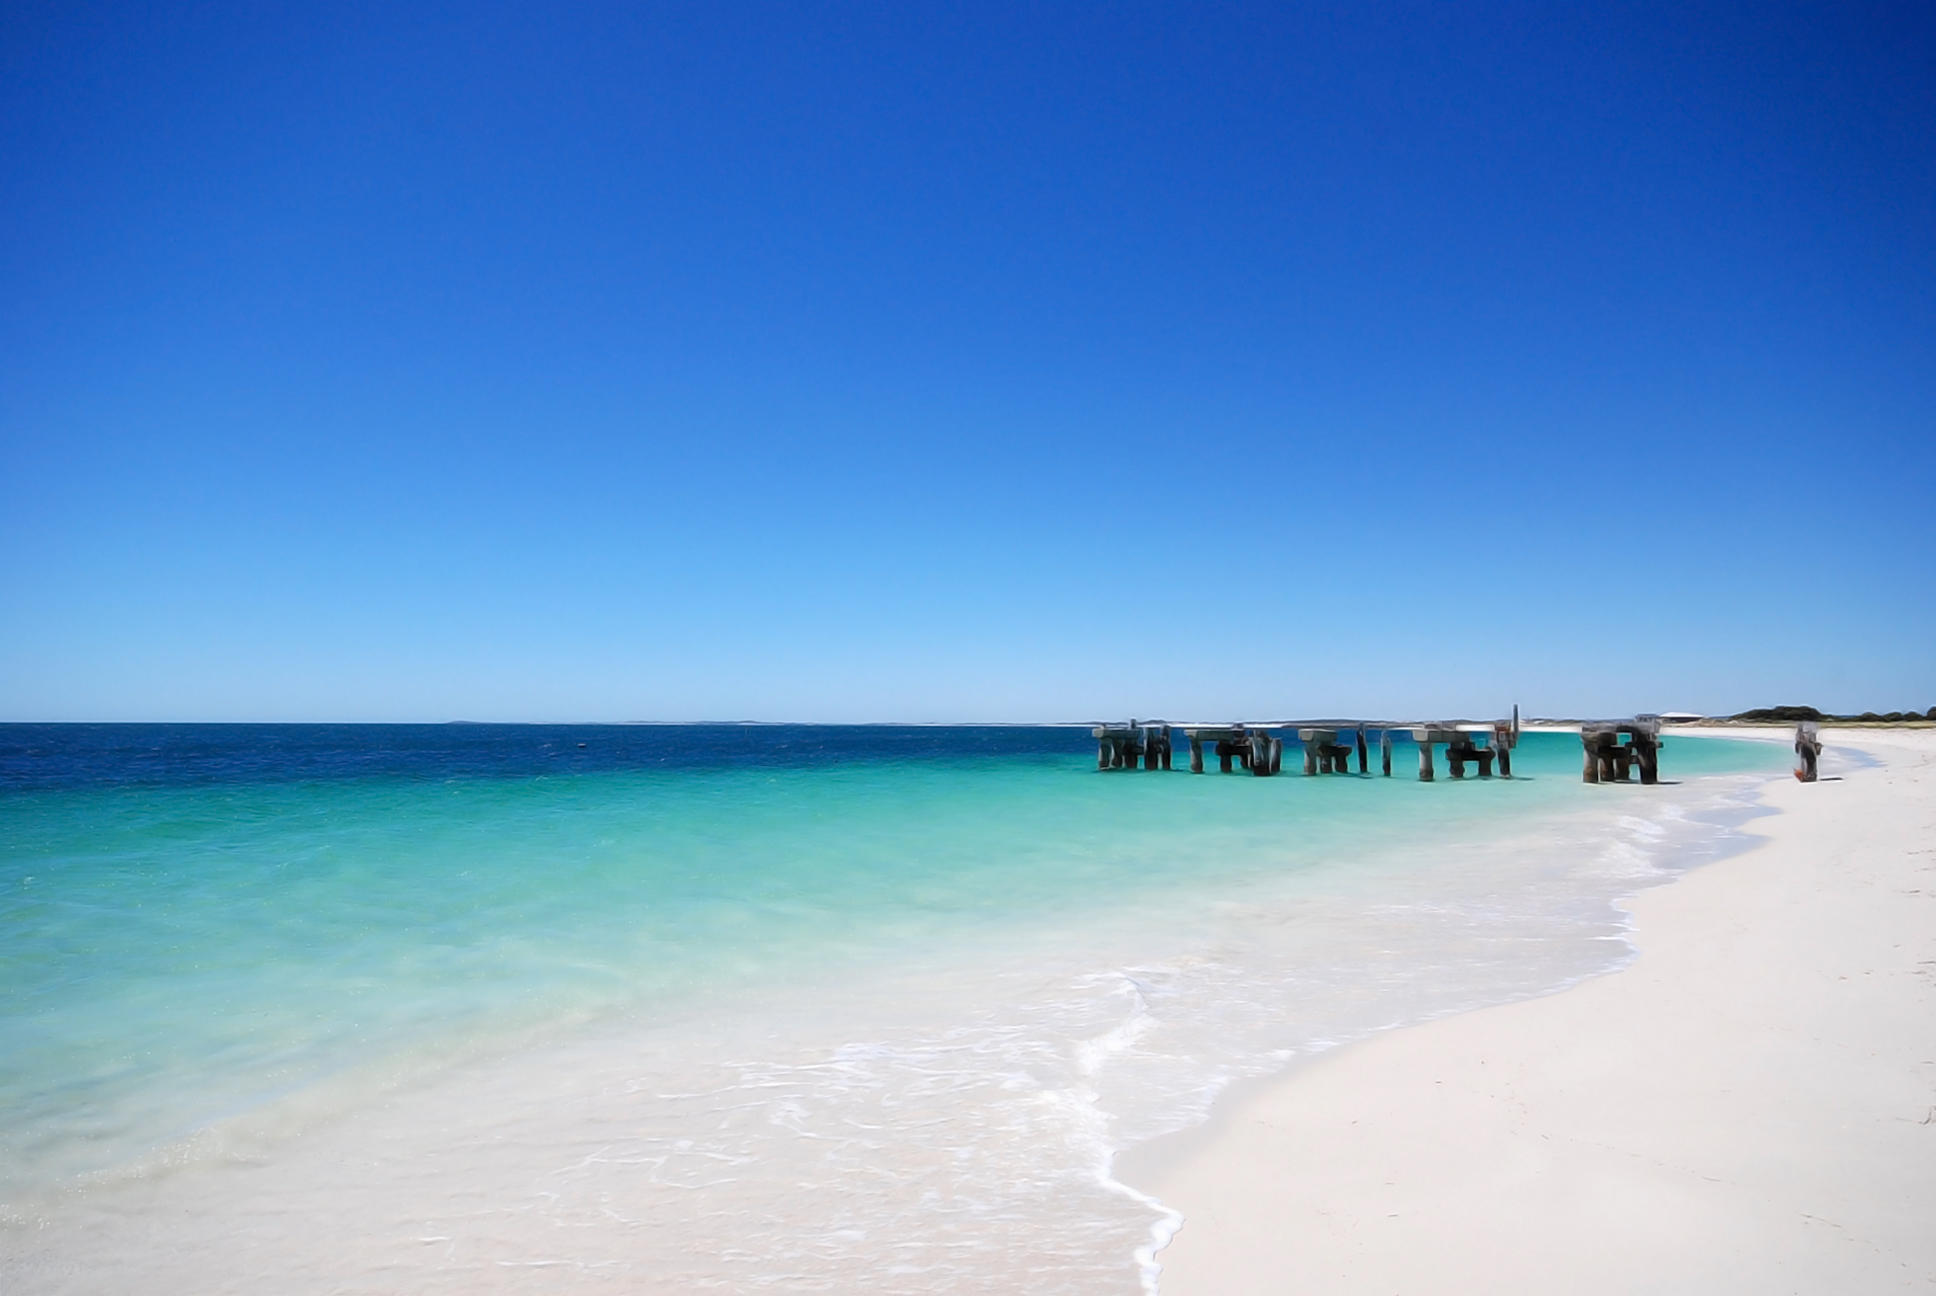 Images Ray White Jurien Bay